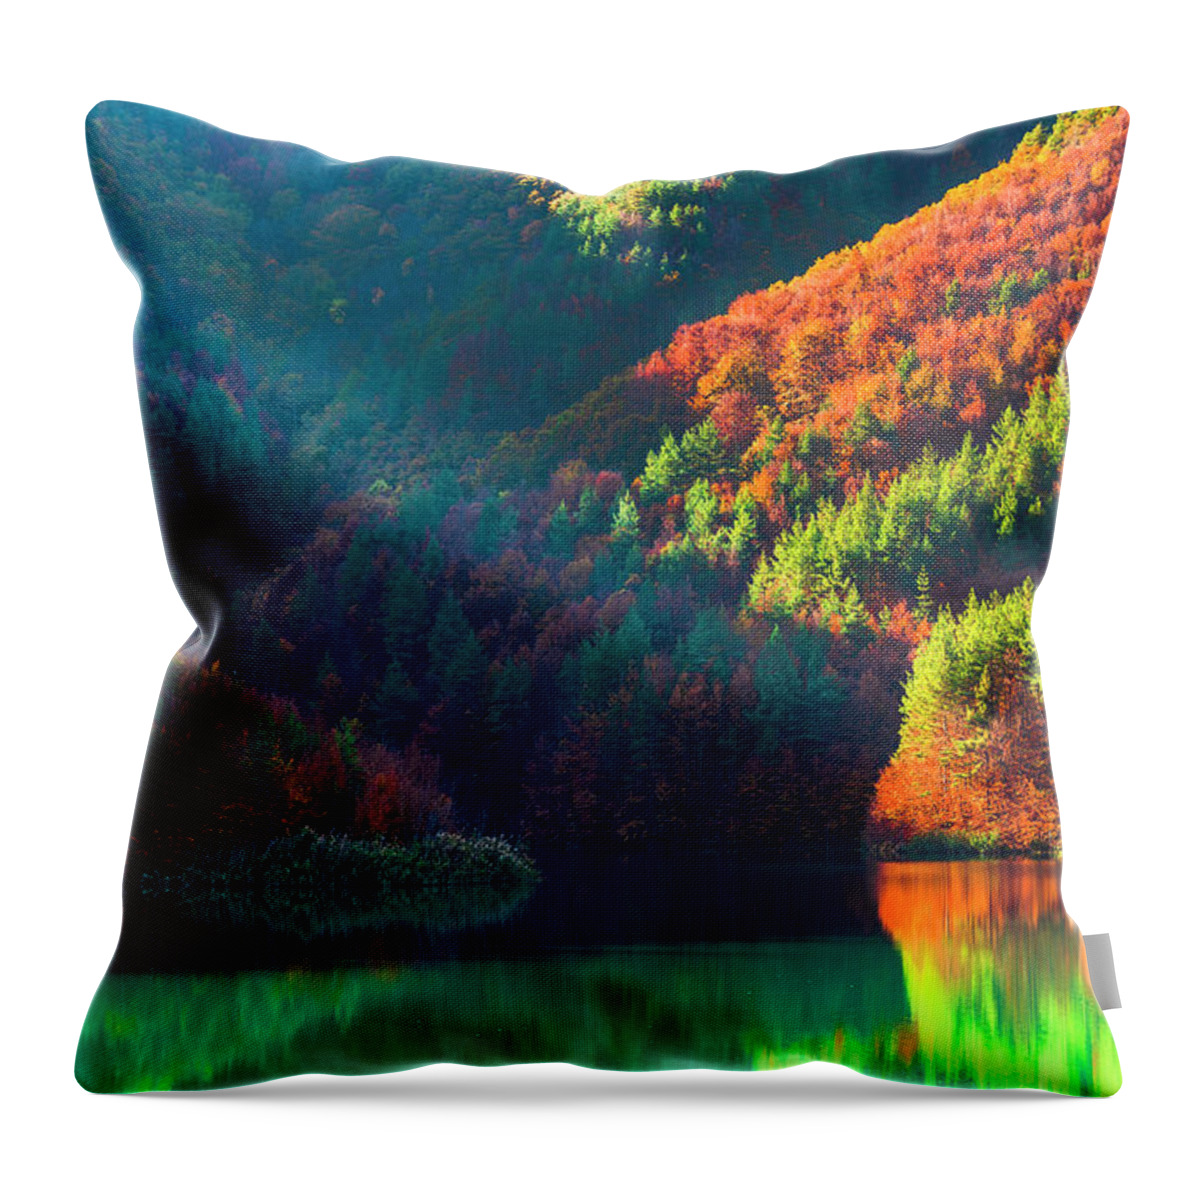 Bulgaria Throw Pillow featuring the photograph Green Lake by Evgeni Dinev